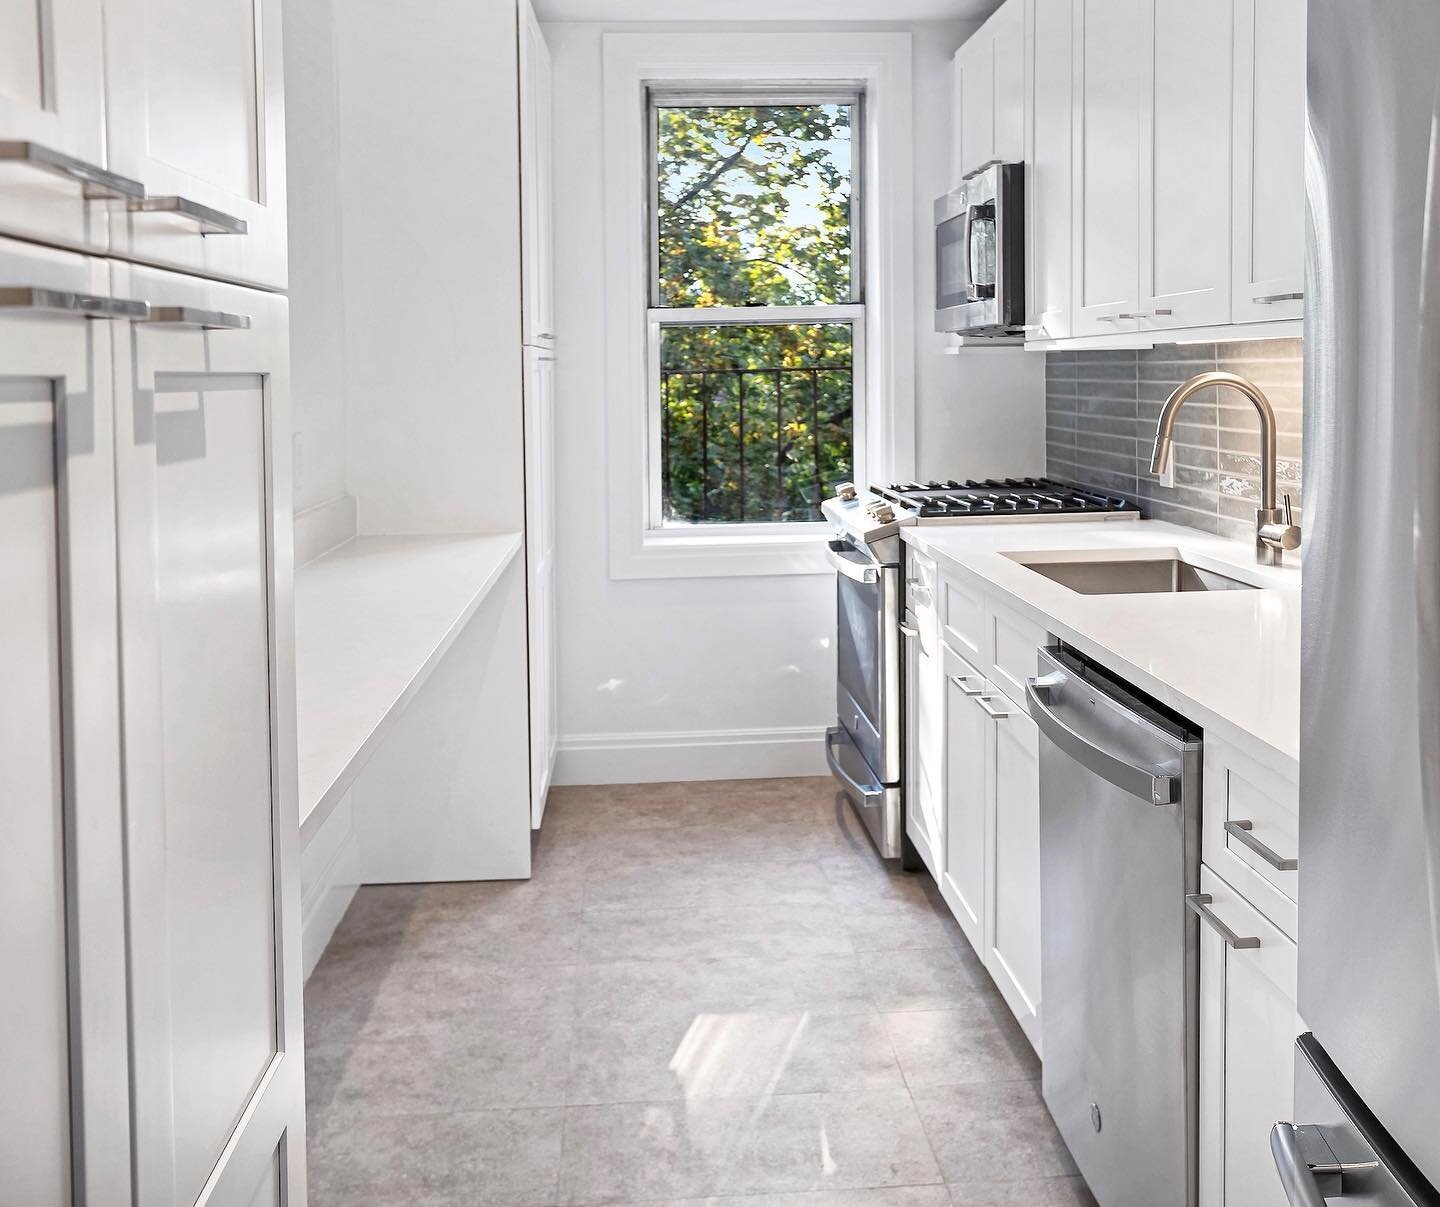 Does the perfect kitchen have a large window? 👀☀️